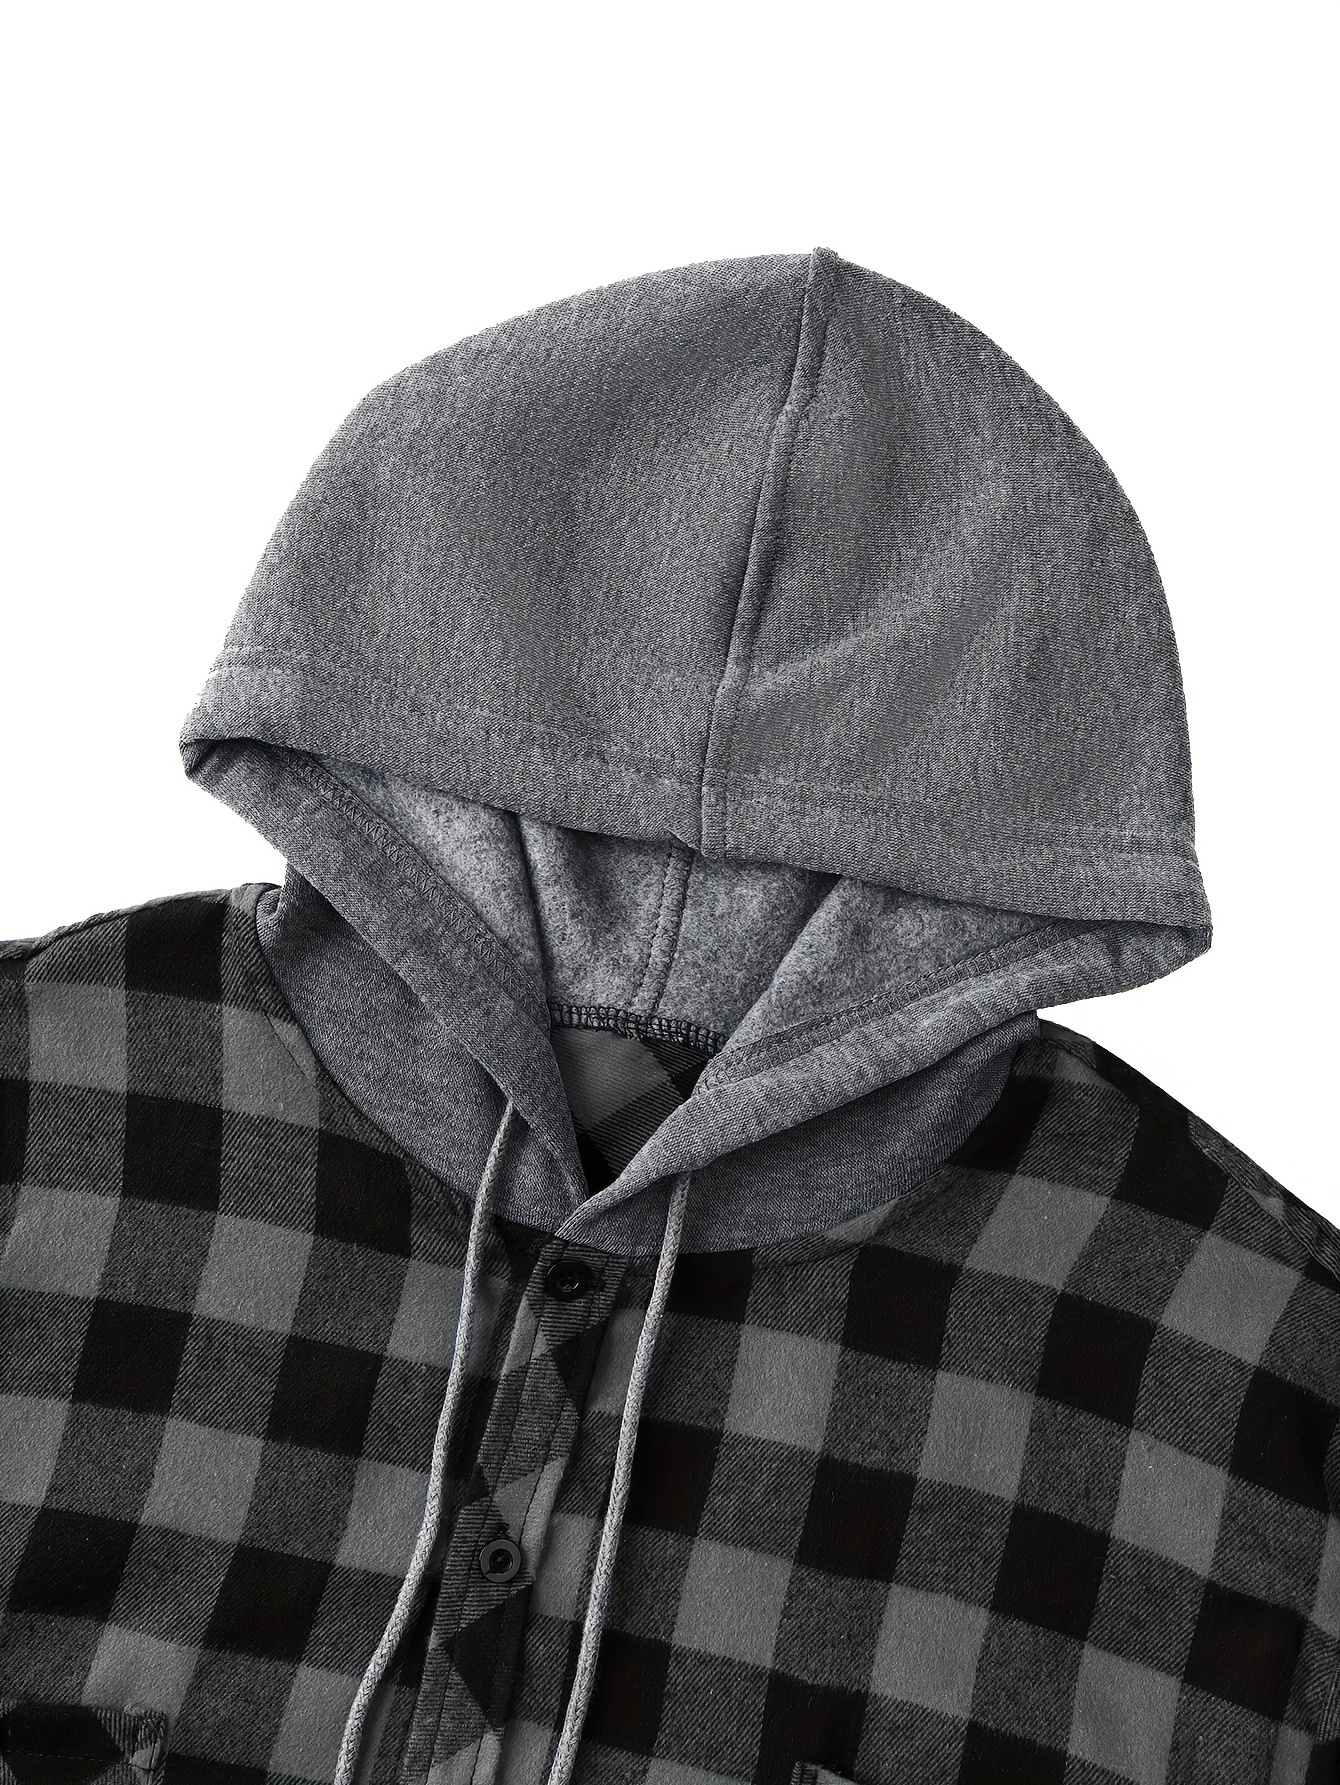 long sleeve casual regular fit button up hooded shirts jacket plaid shirt coat for men details 2